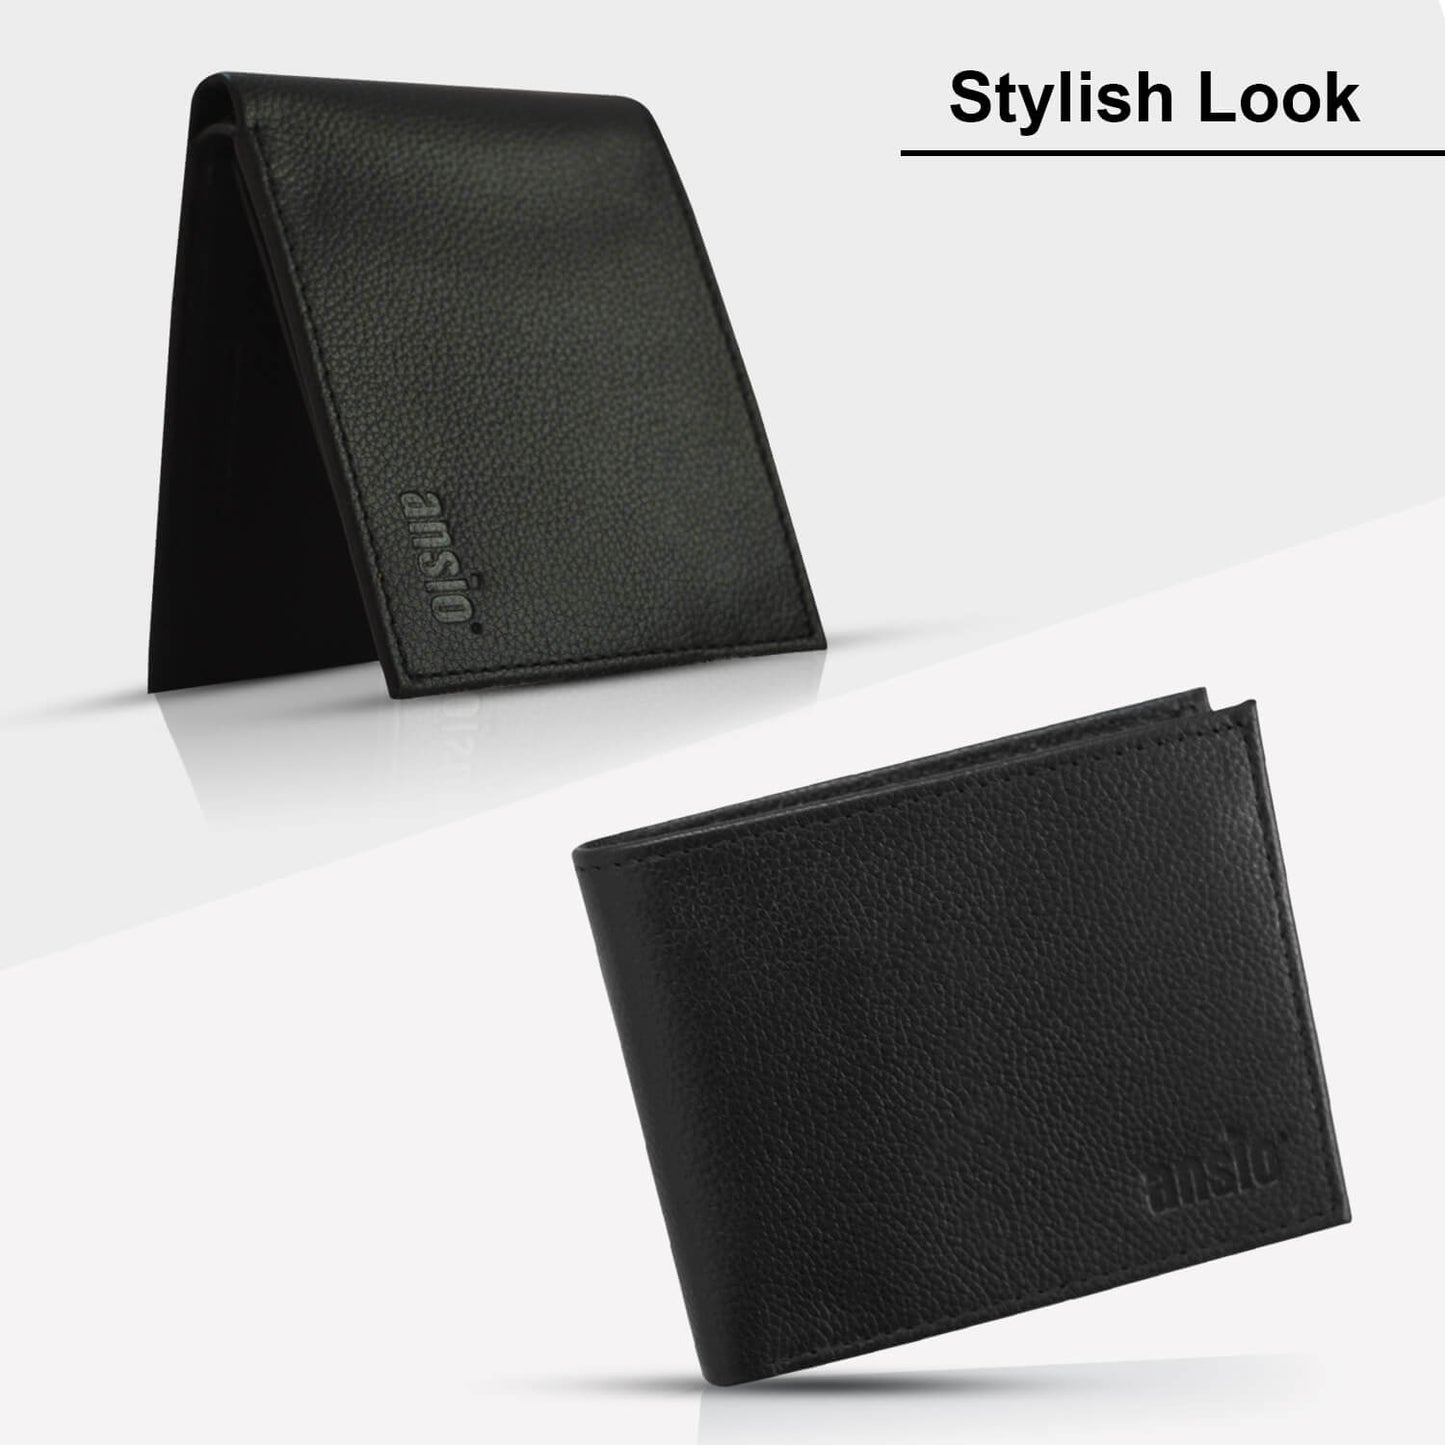 ANSIO Pure Leather Men's wallet Apparel & Accessories